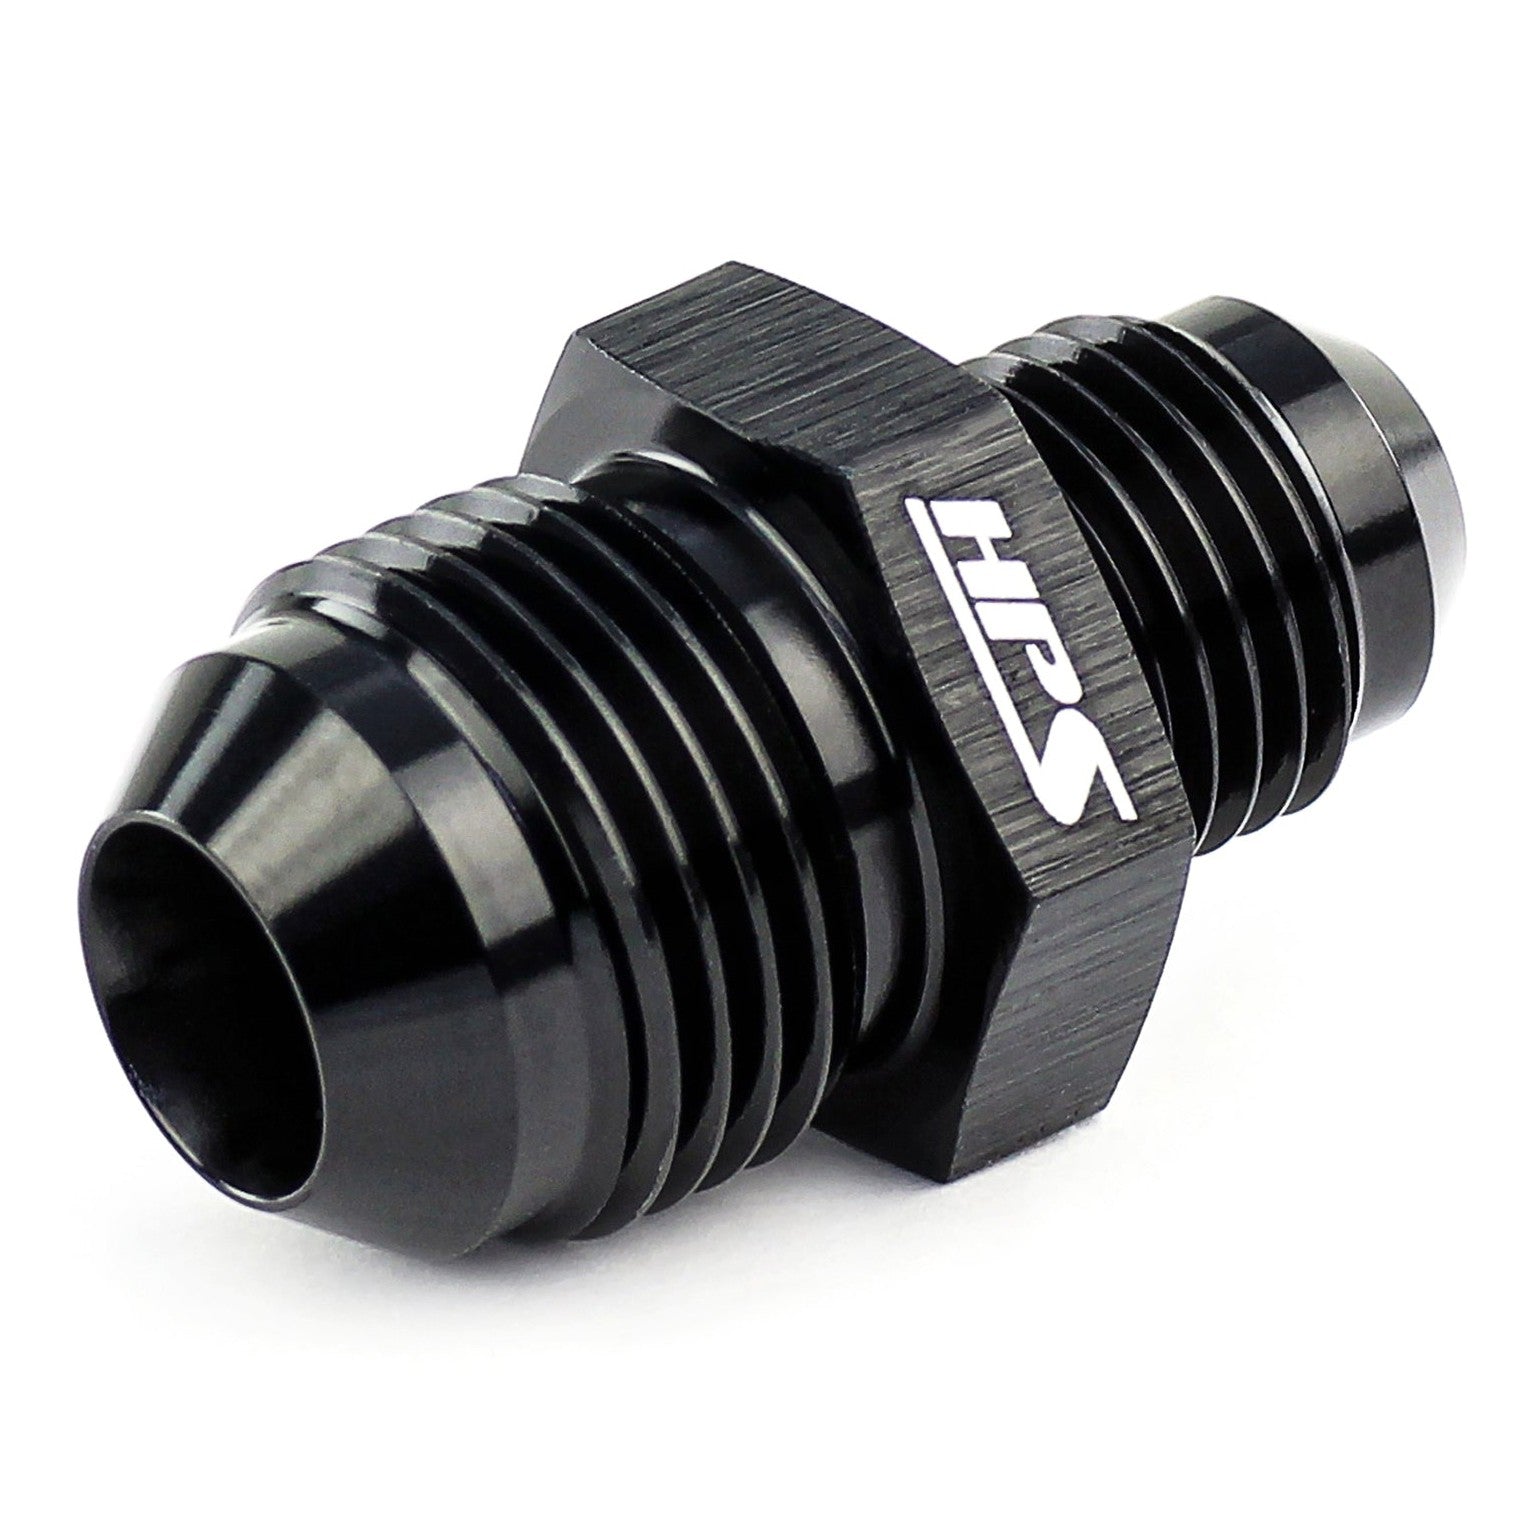 HPS AN Male to Male Union Adapter (Reducer) Fitting [Straight] [AN -12 to -8] (Aluminum, Black)